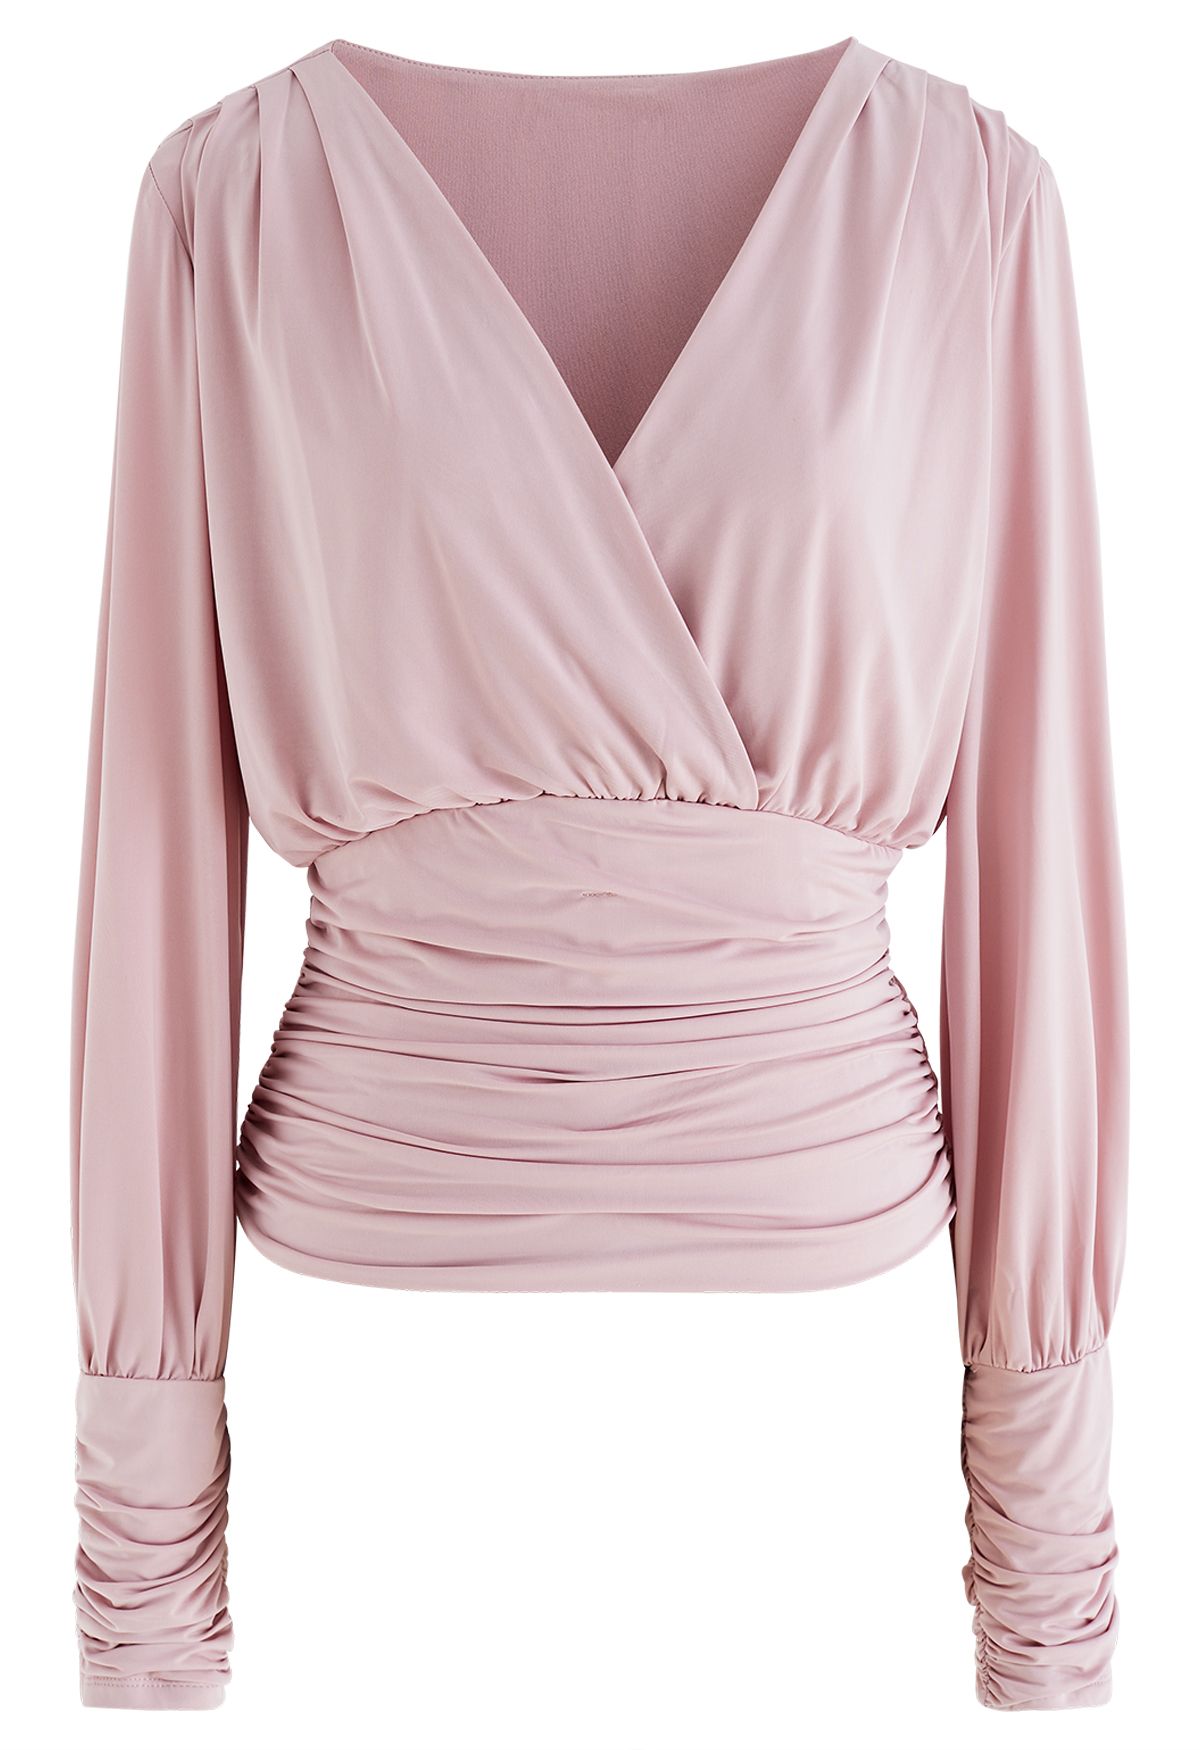 Tender Ruched Detail Faux Wrap Top